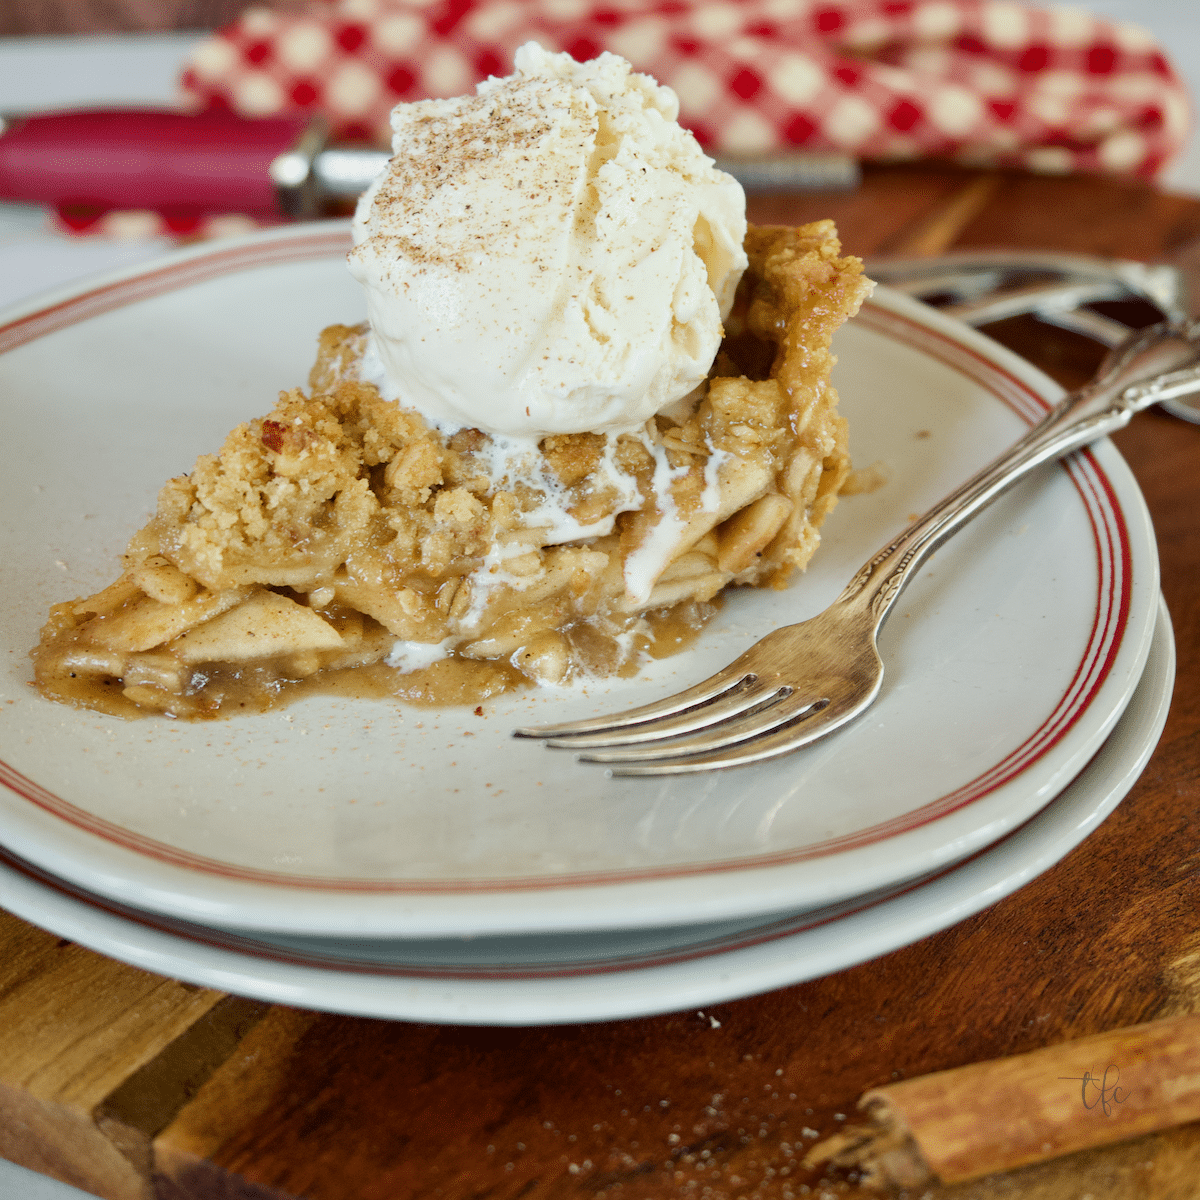 Slice of gluten-free apple pie on a plate with a fork and a scoop of melting vanilla ice cream on top.